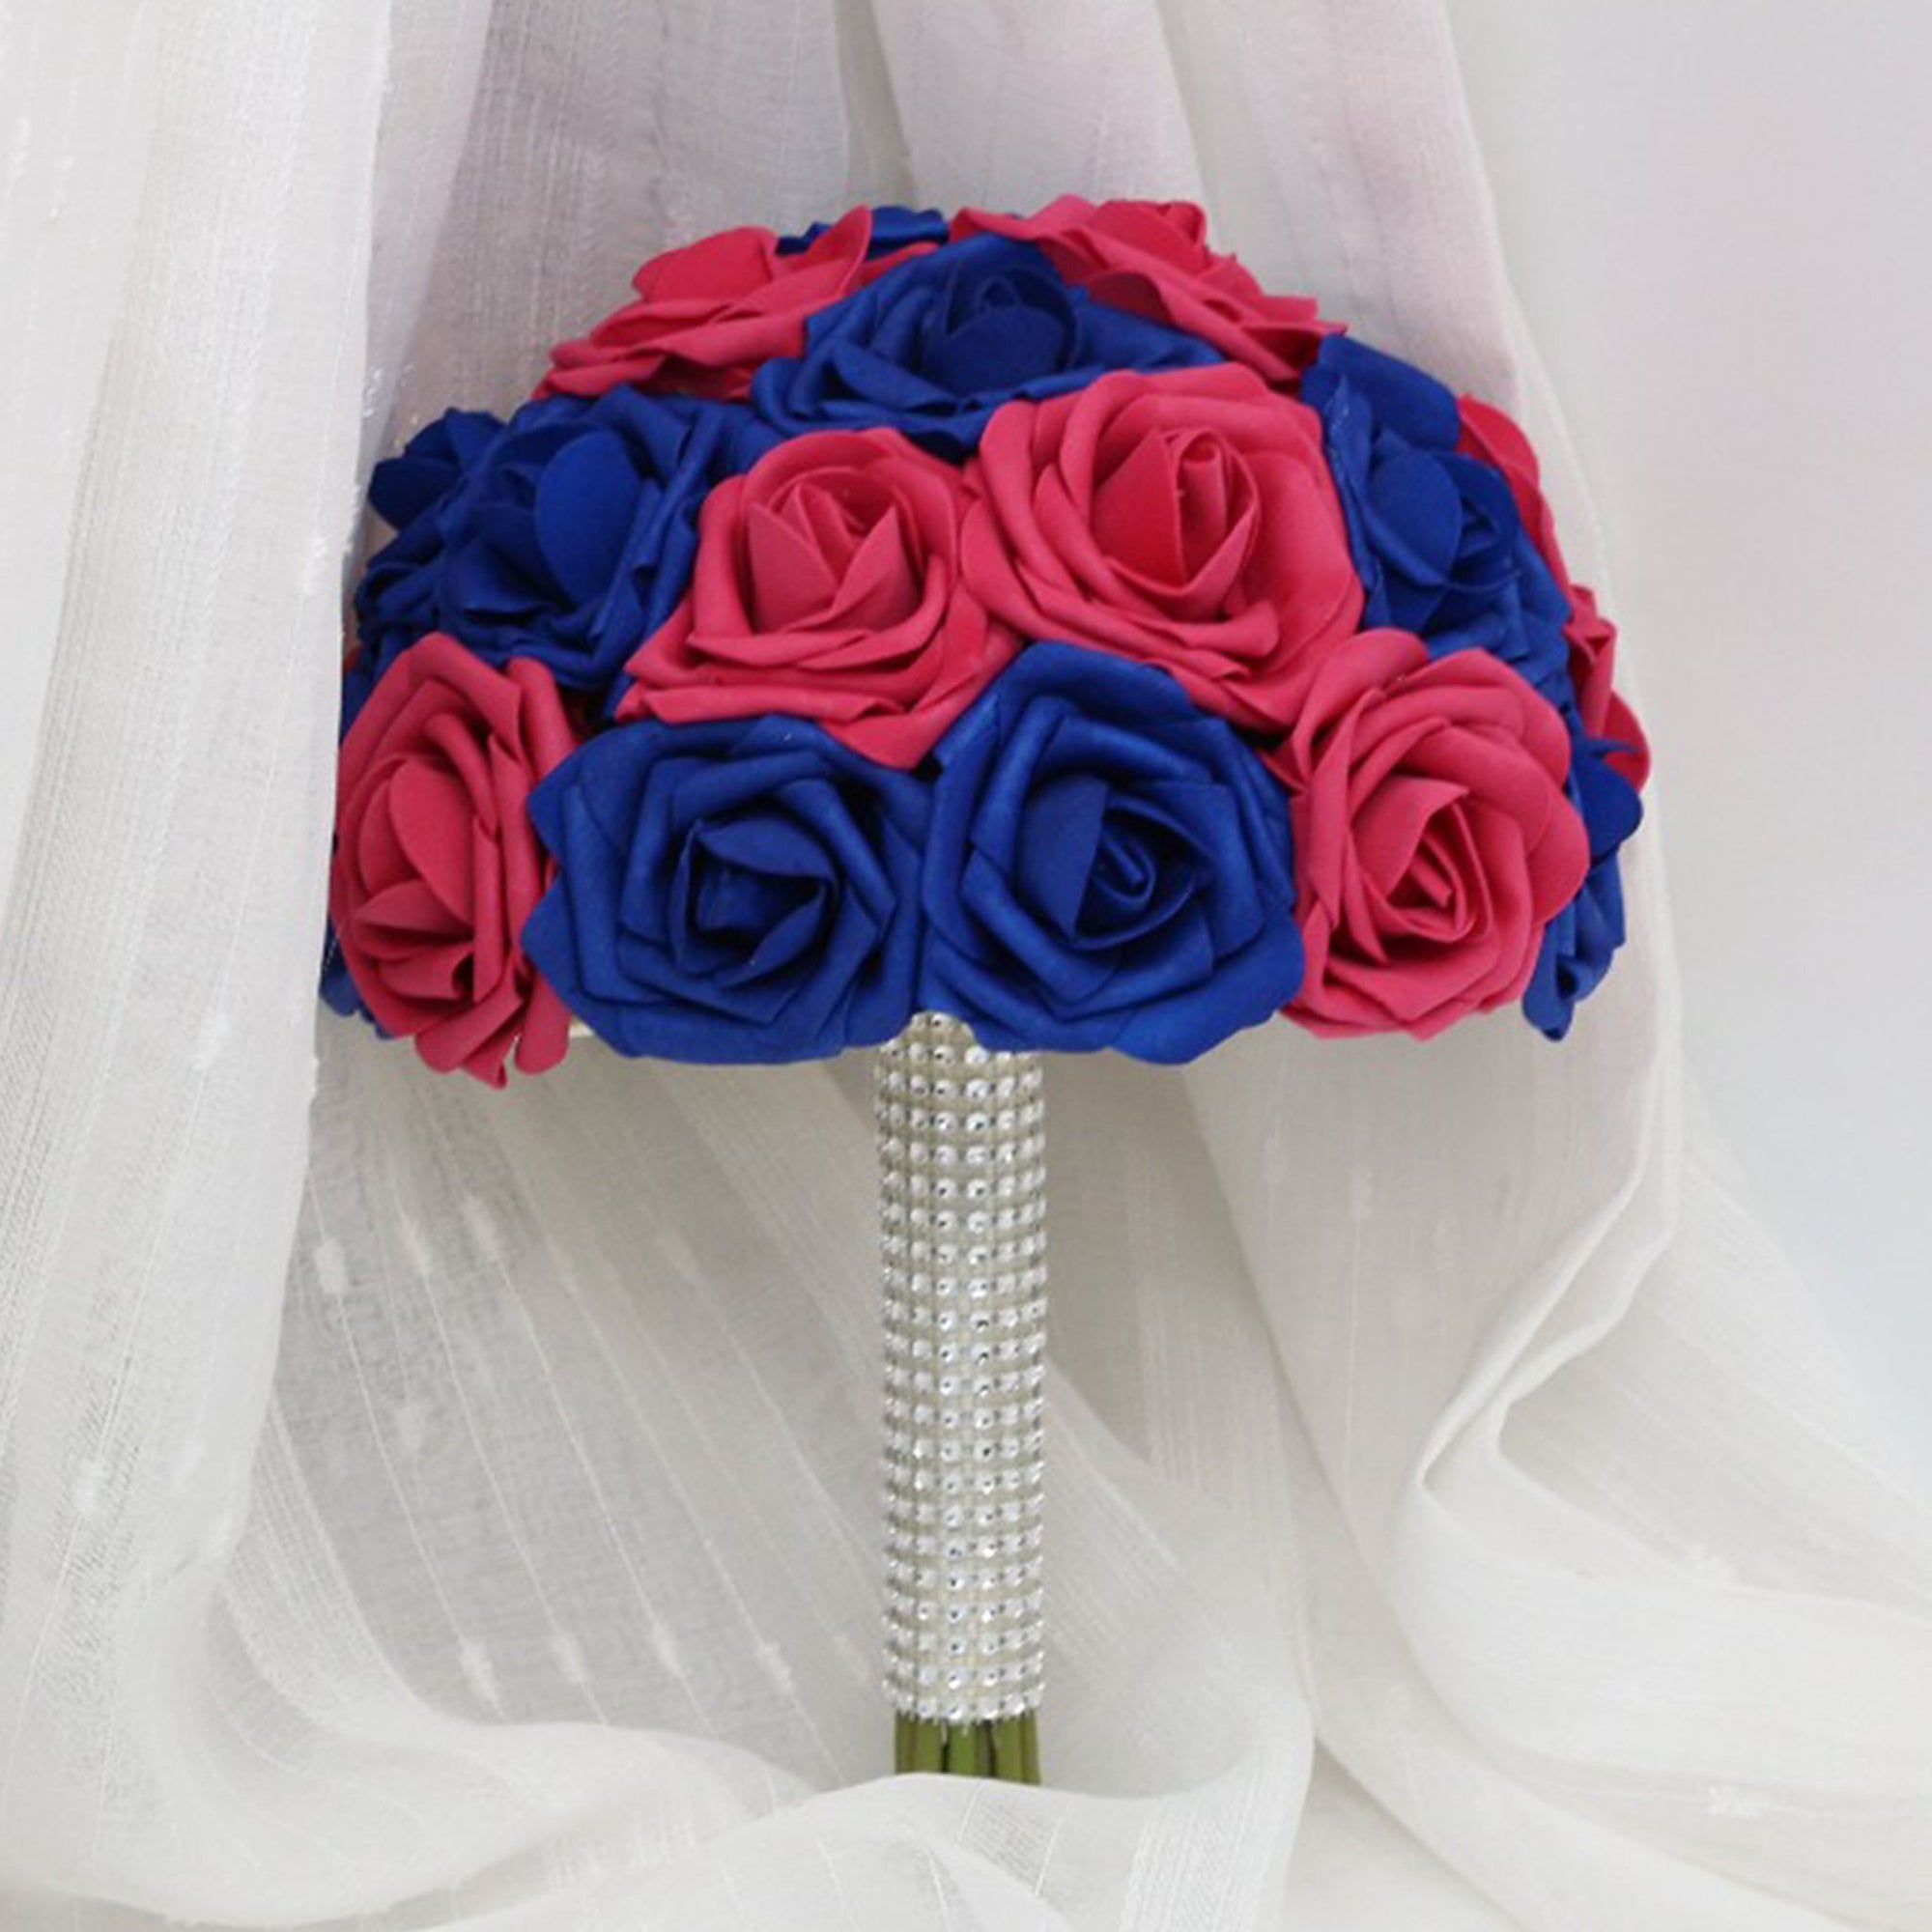 Hot Pink and Royal Blue Bouquet of Roses Wedding Flowers